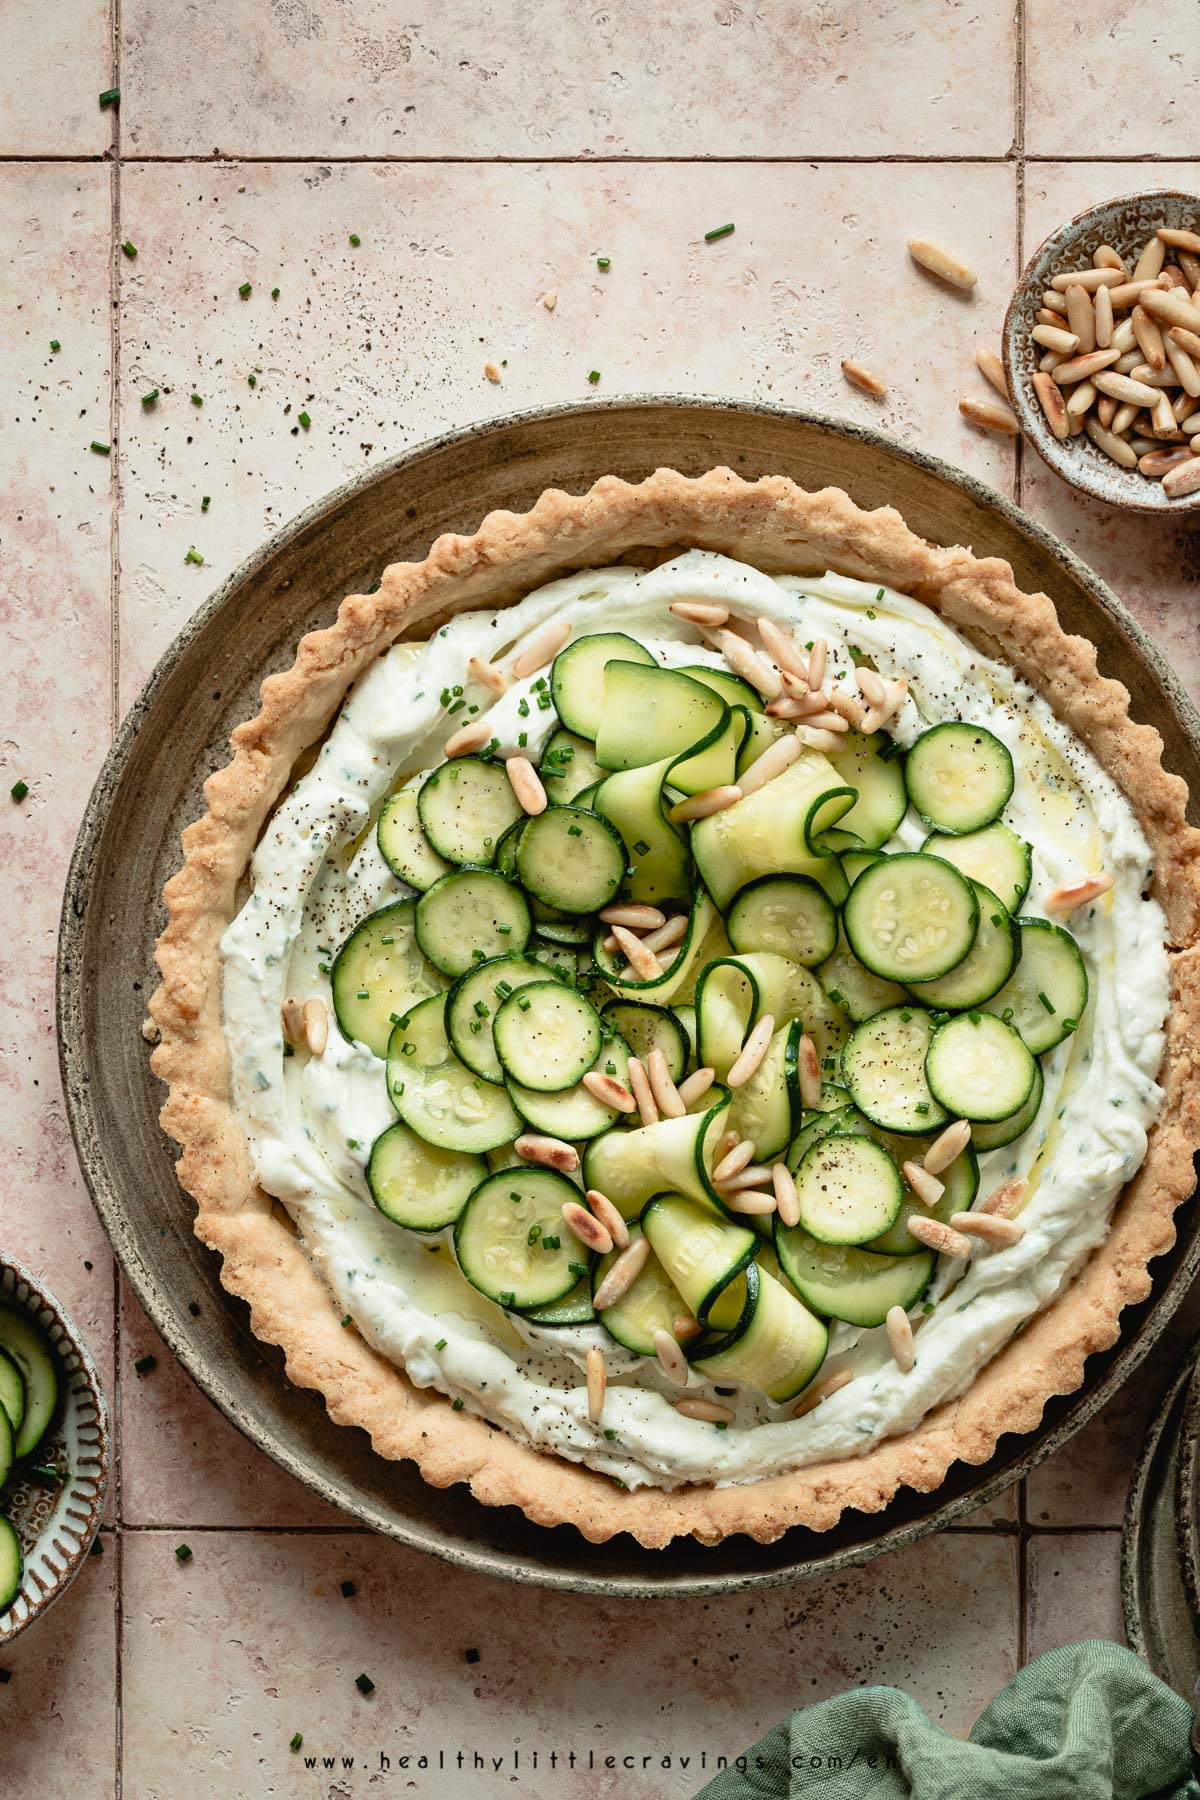 A delicious zucchini pie with feta cheese, on tiles